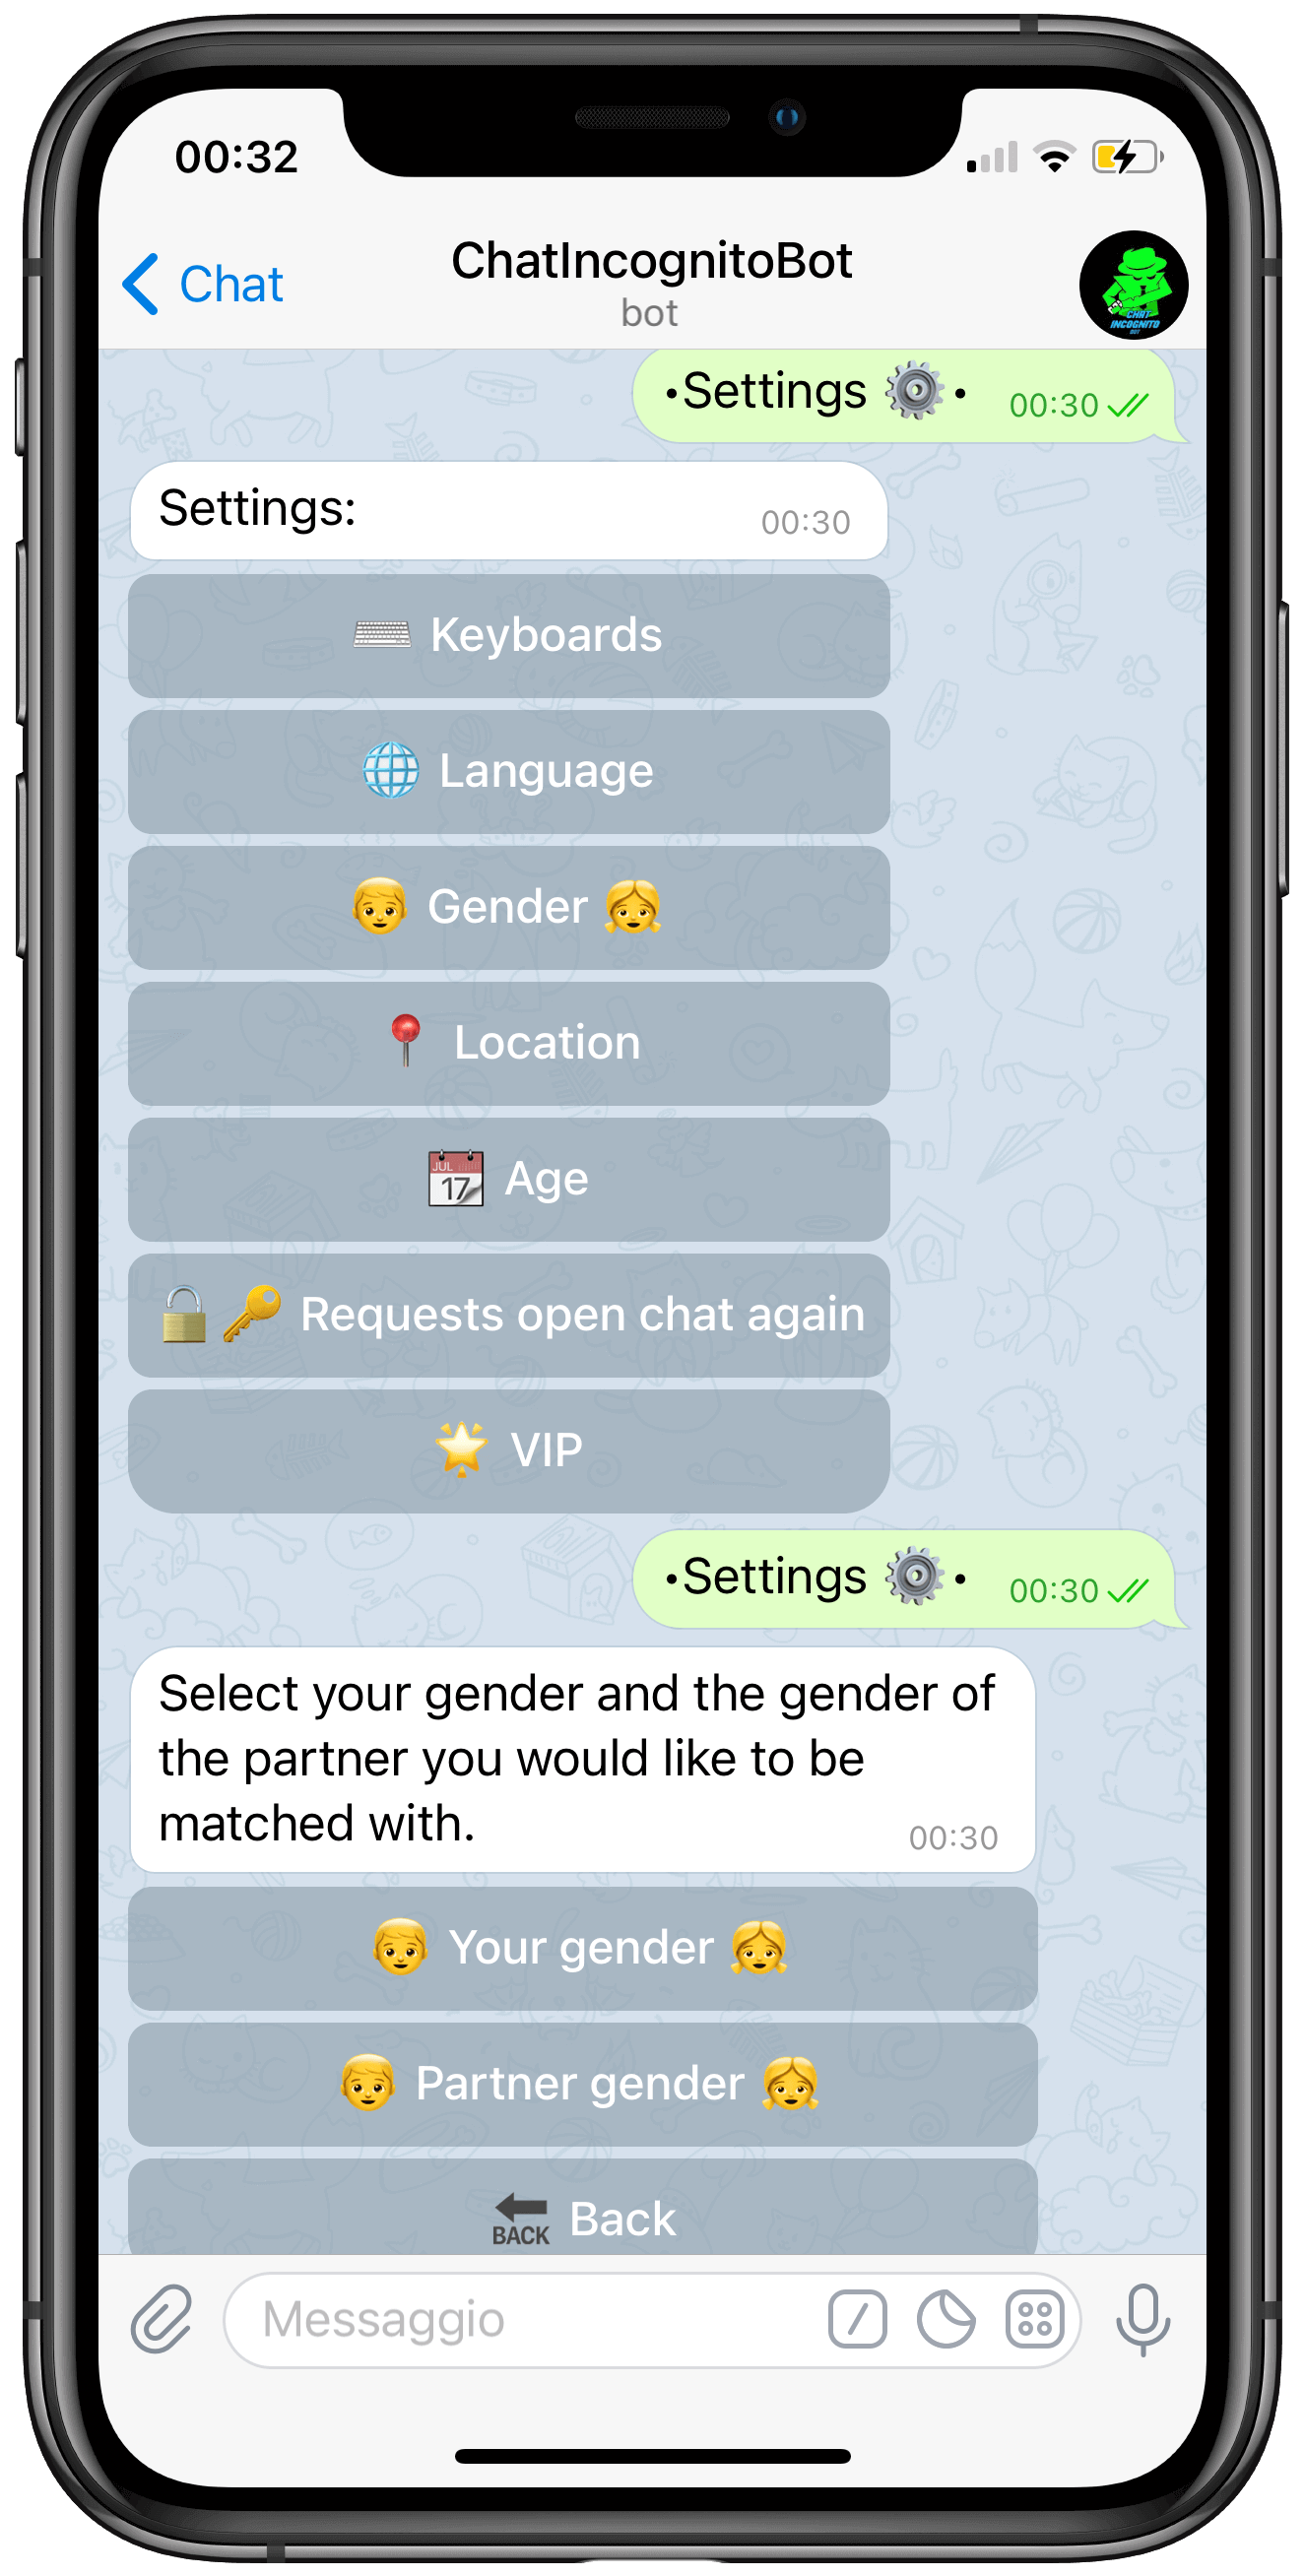 sex settings of ChatIncognitoBot